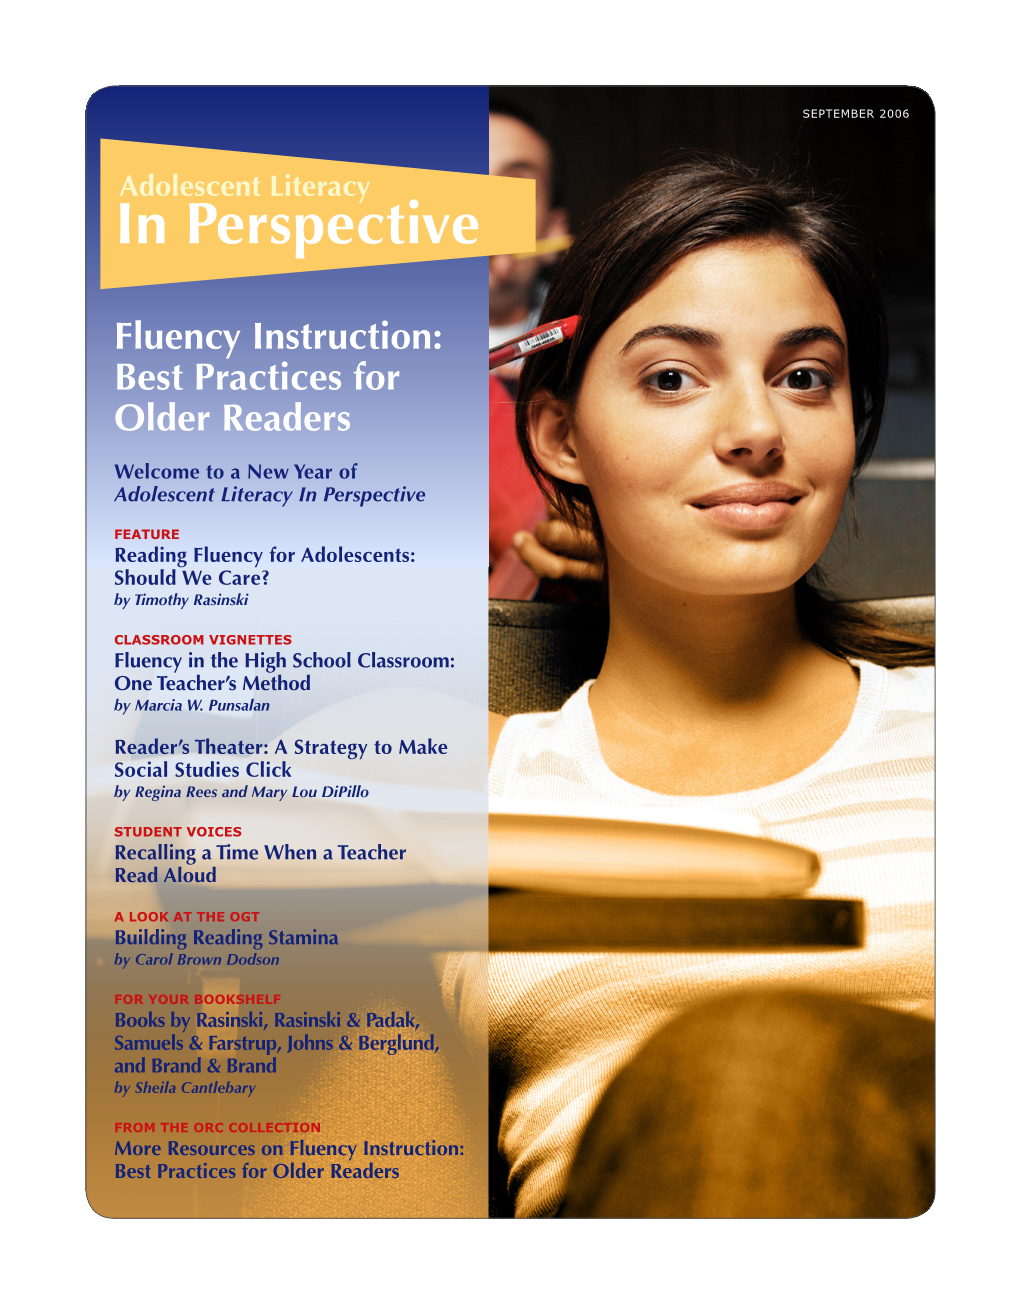 Reading Fluency for Adolescents: Should We Care? by Timothy Rasinski